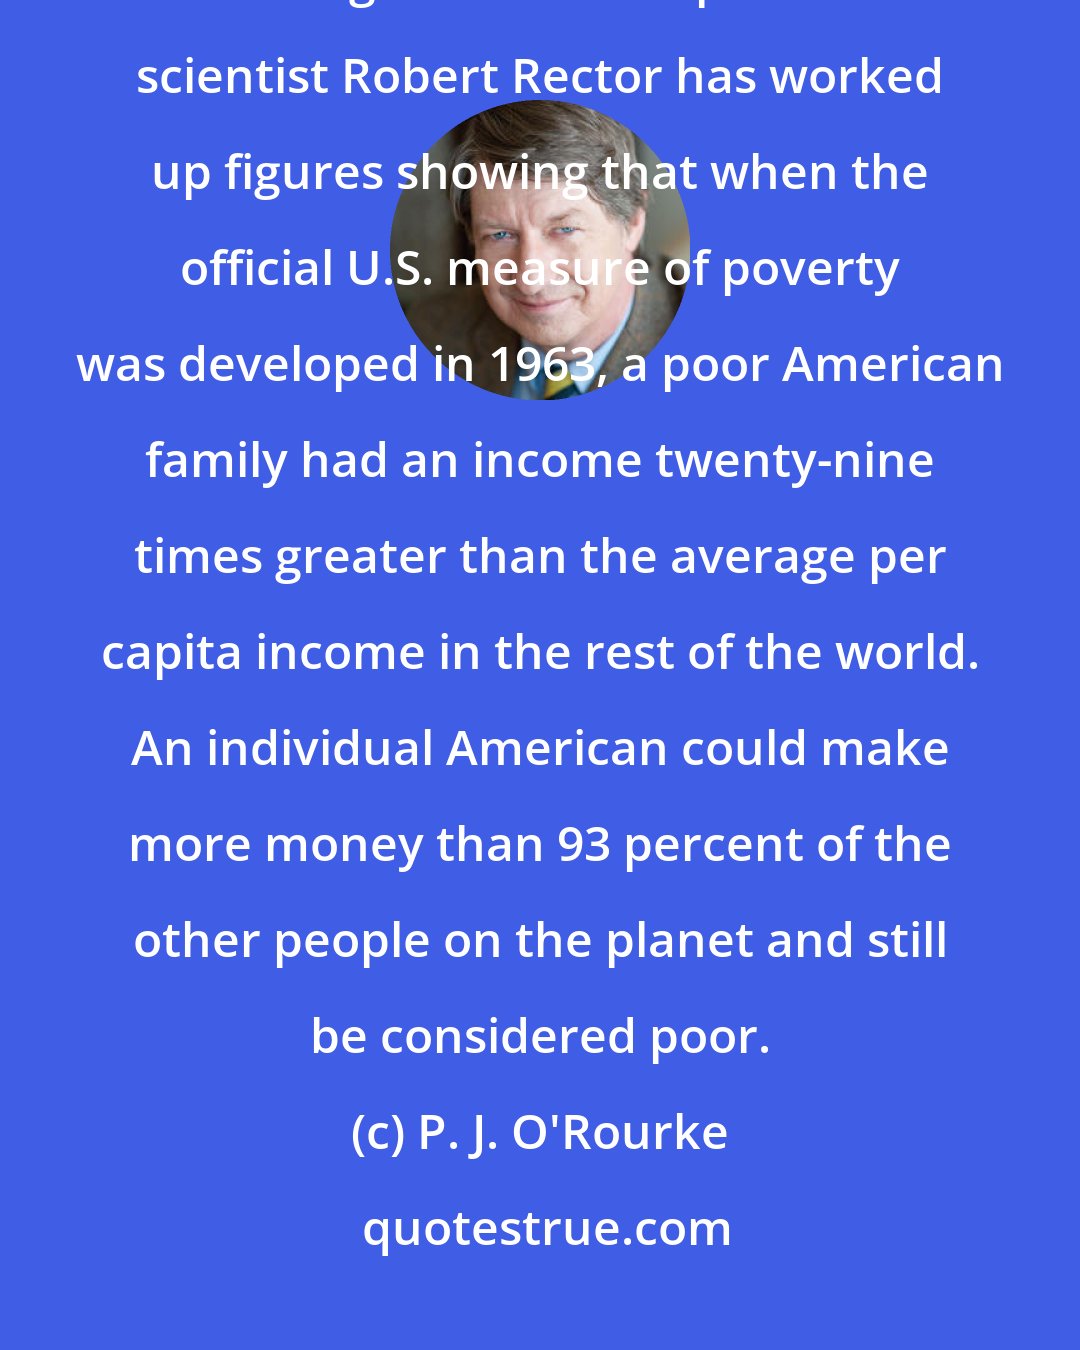 P. J. O'Rourke: In comparative terms, there's no poverty in America by a long shot. Heritage Foundation political scientist Robert Rector has worked up figures showing that when the official U.S. measure of poverty was developed in 1963, a poor American family had an income twenty-nine times greater than the average per capita income in the rest of the world. An individual American could make more money than 93 percent of the other people on the planet and still be considered poor.